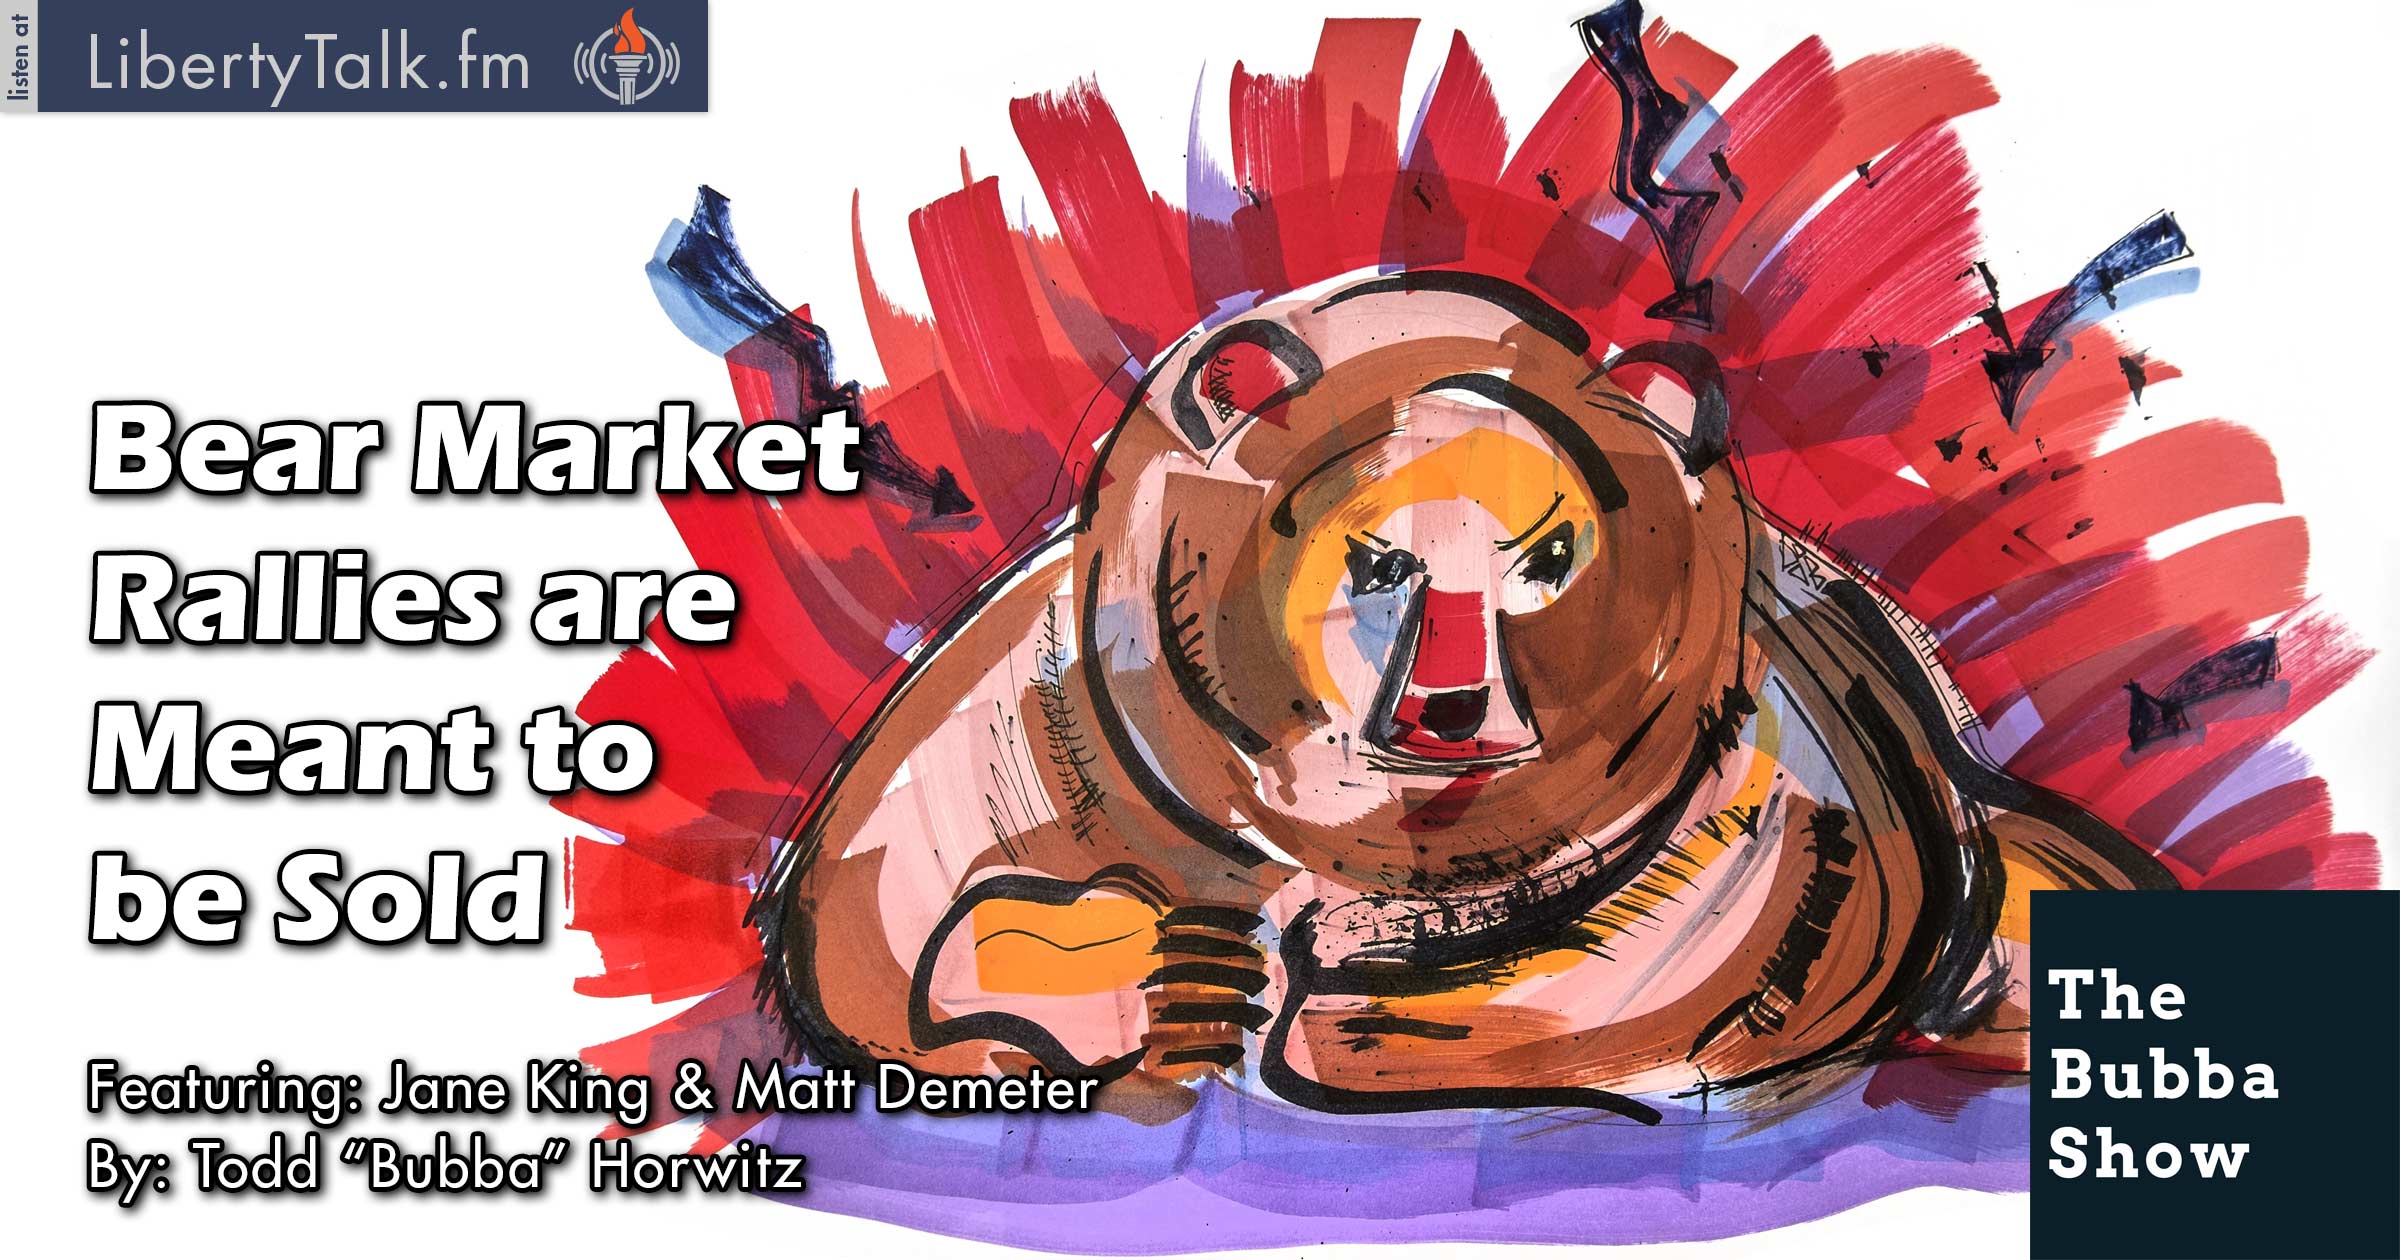 Bear Market Rallies are Meant to be Sold
 - The Bubba Show